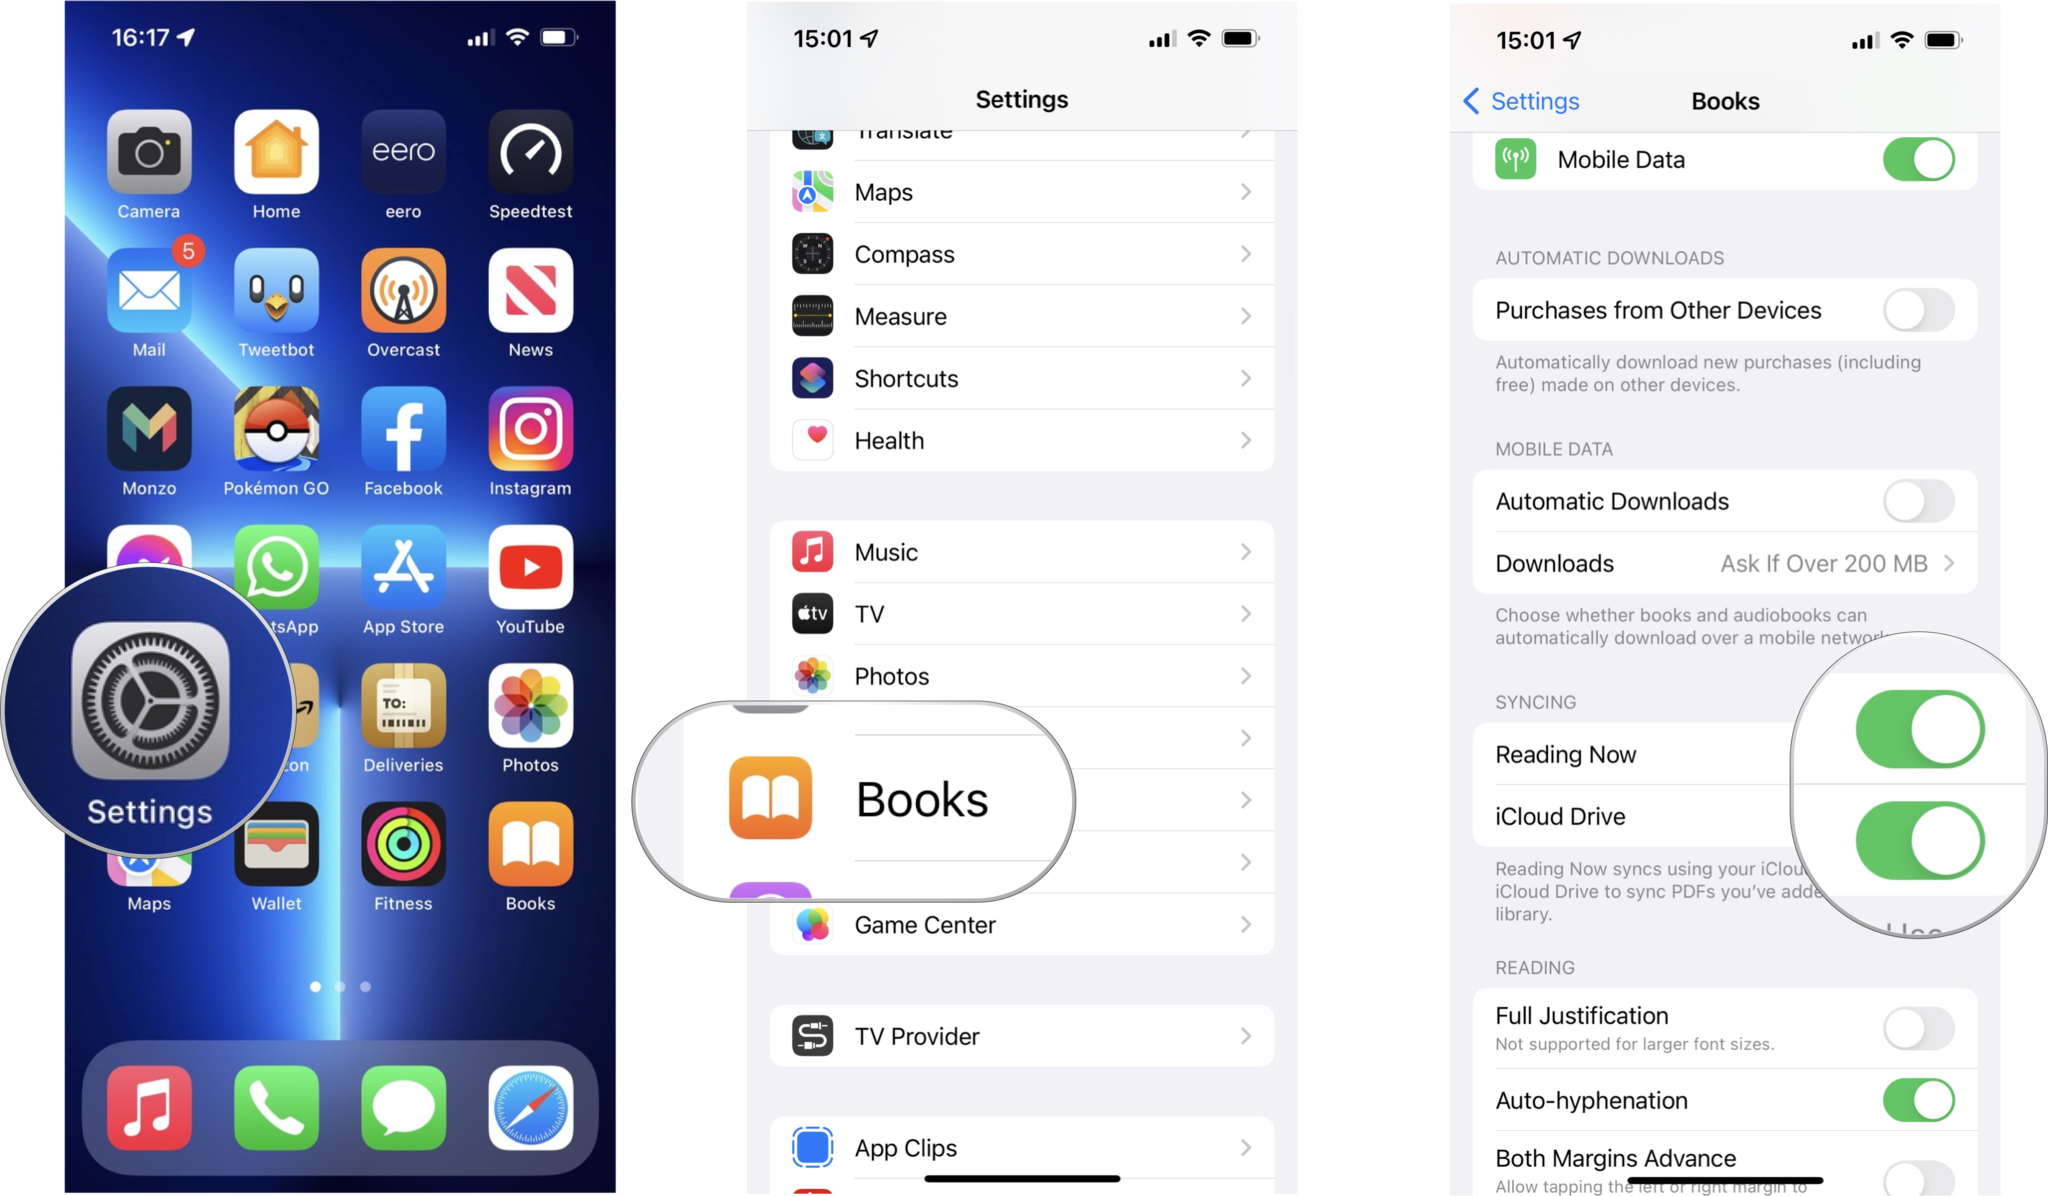 Apple Books Syncing: Tap Settings, tap Books, toggle both Reading Now and iCloud Drive to On